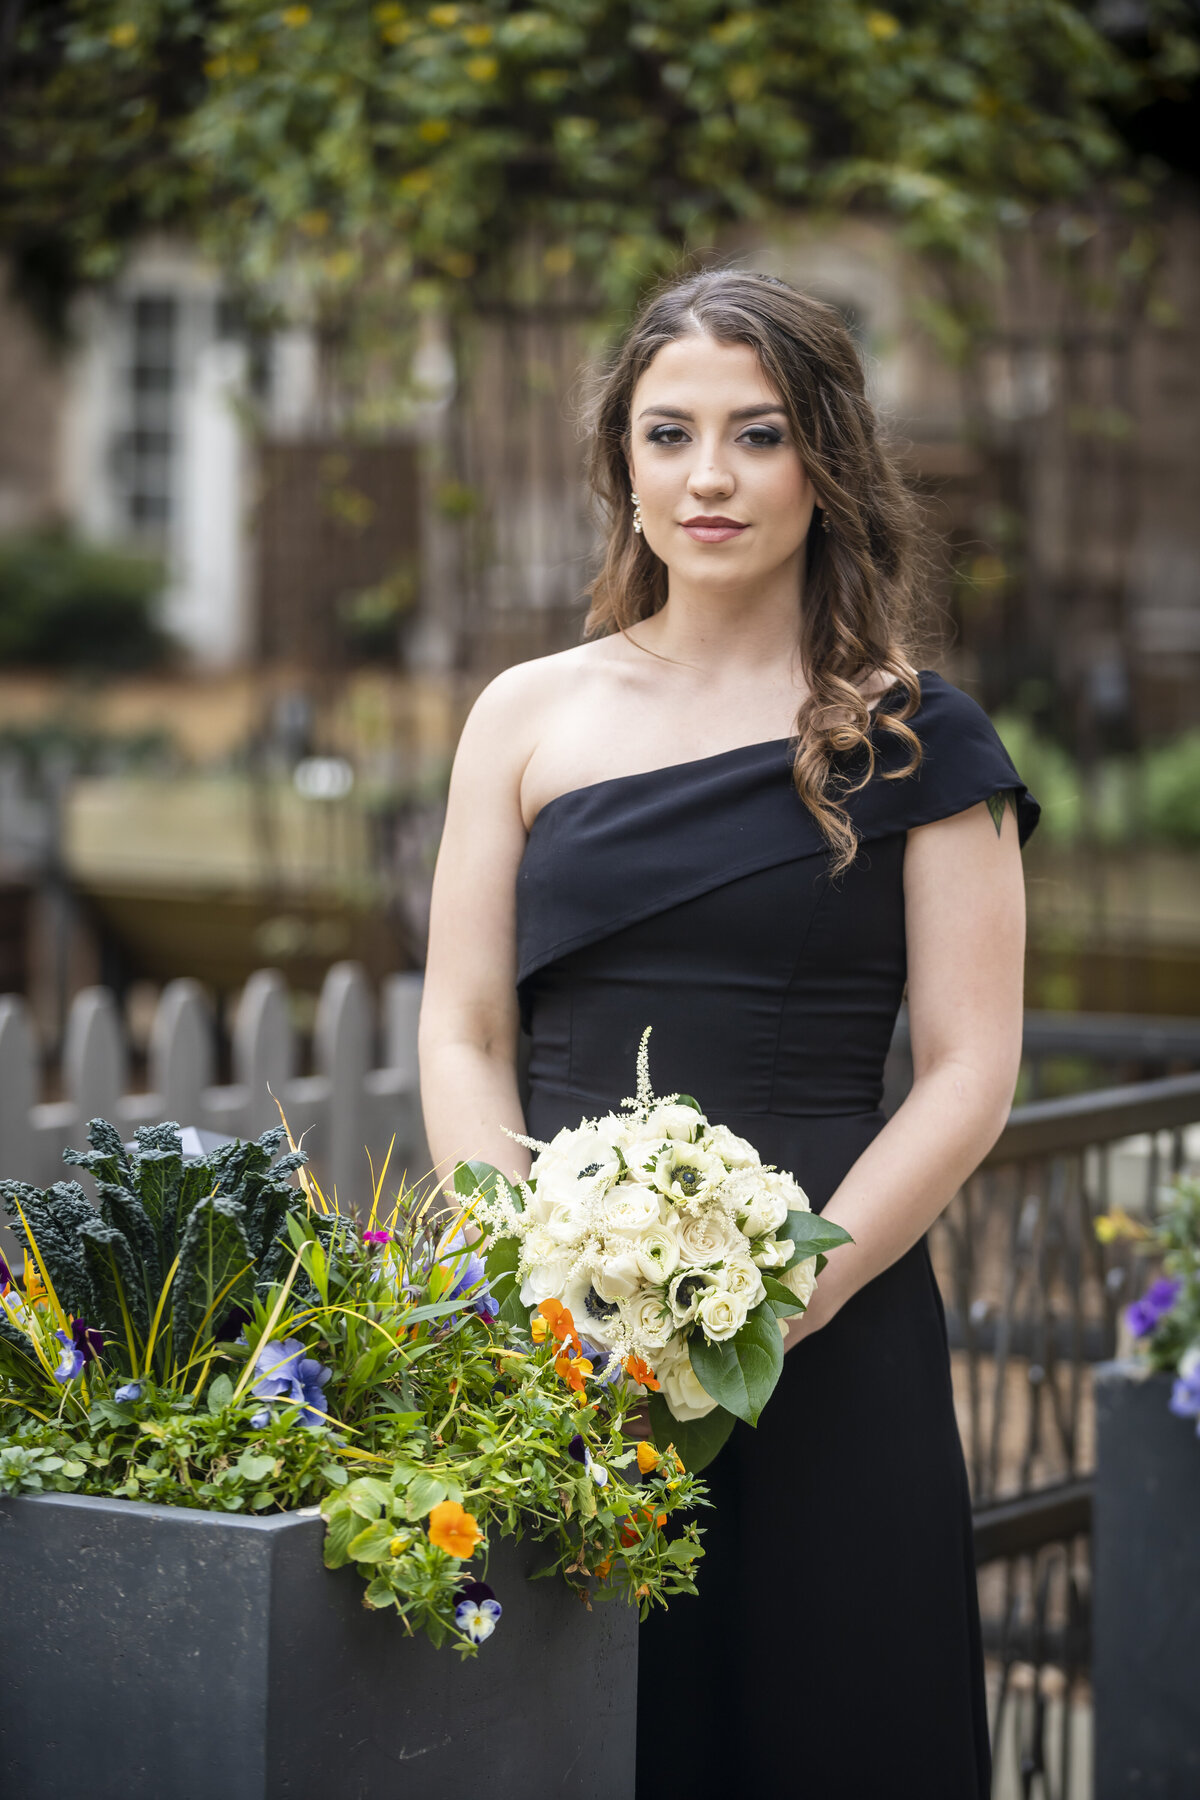 Bridesmaid in black dress holding bouquet.